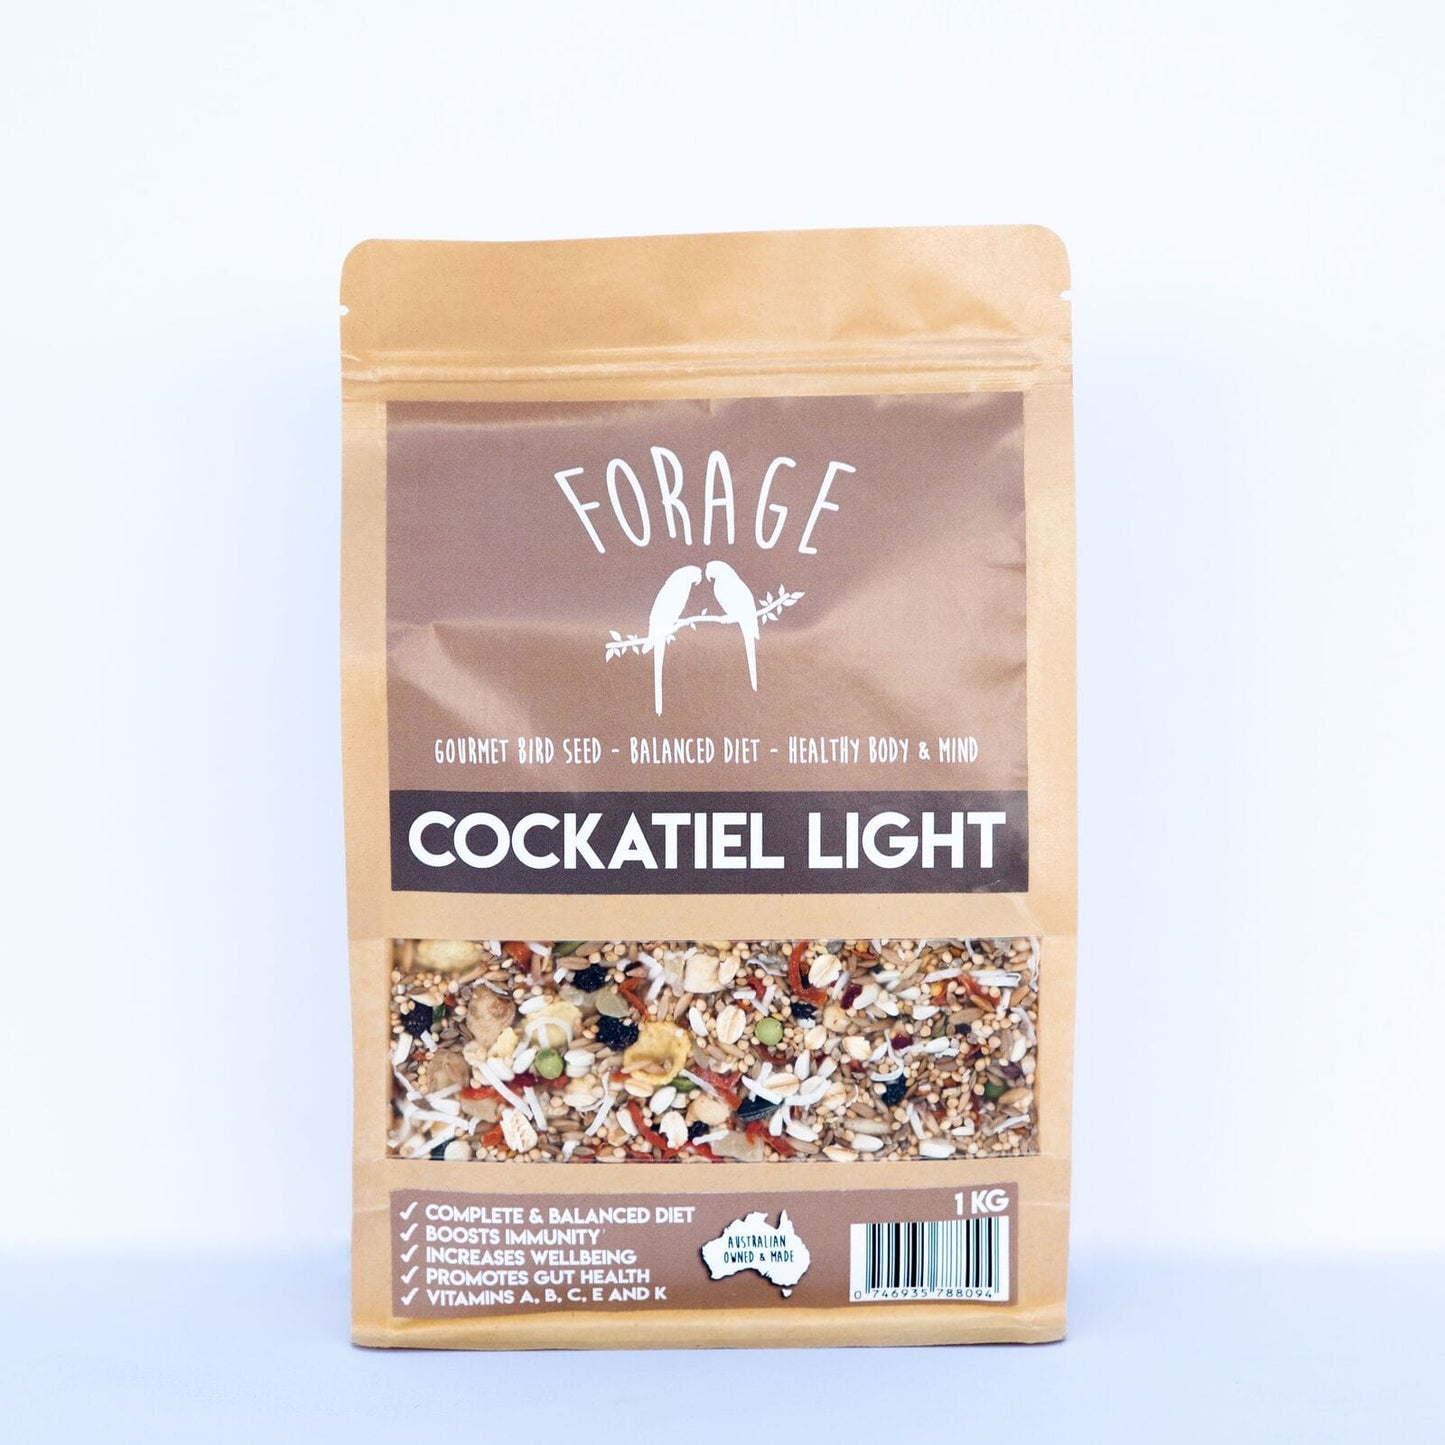 Forage Cockatiel Light Mix (Excl. TAS & WA) from Forage Gourmet Seed